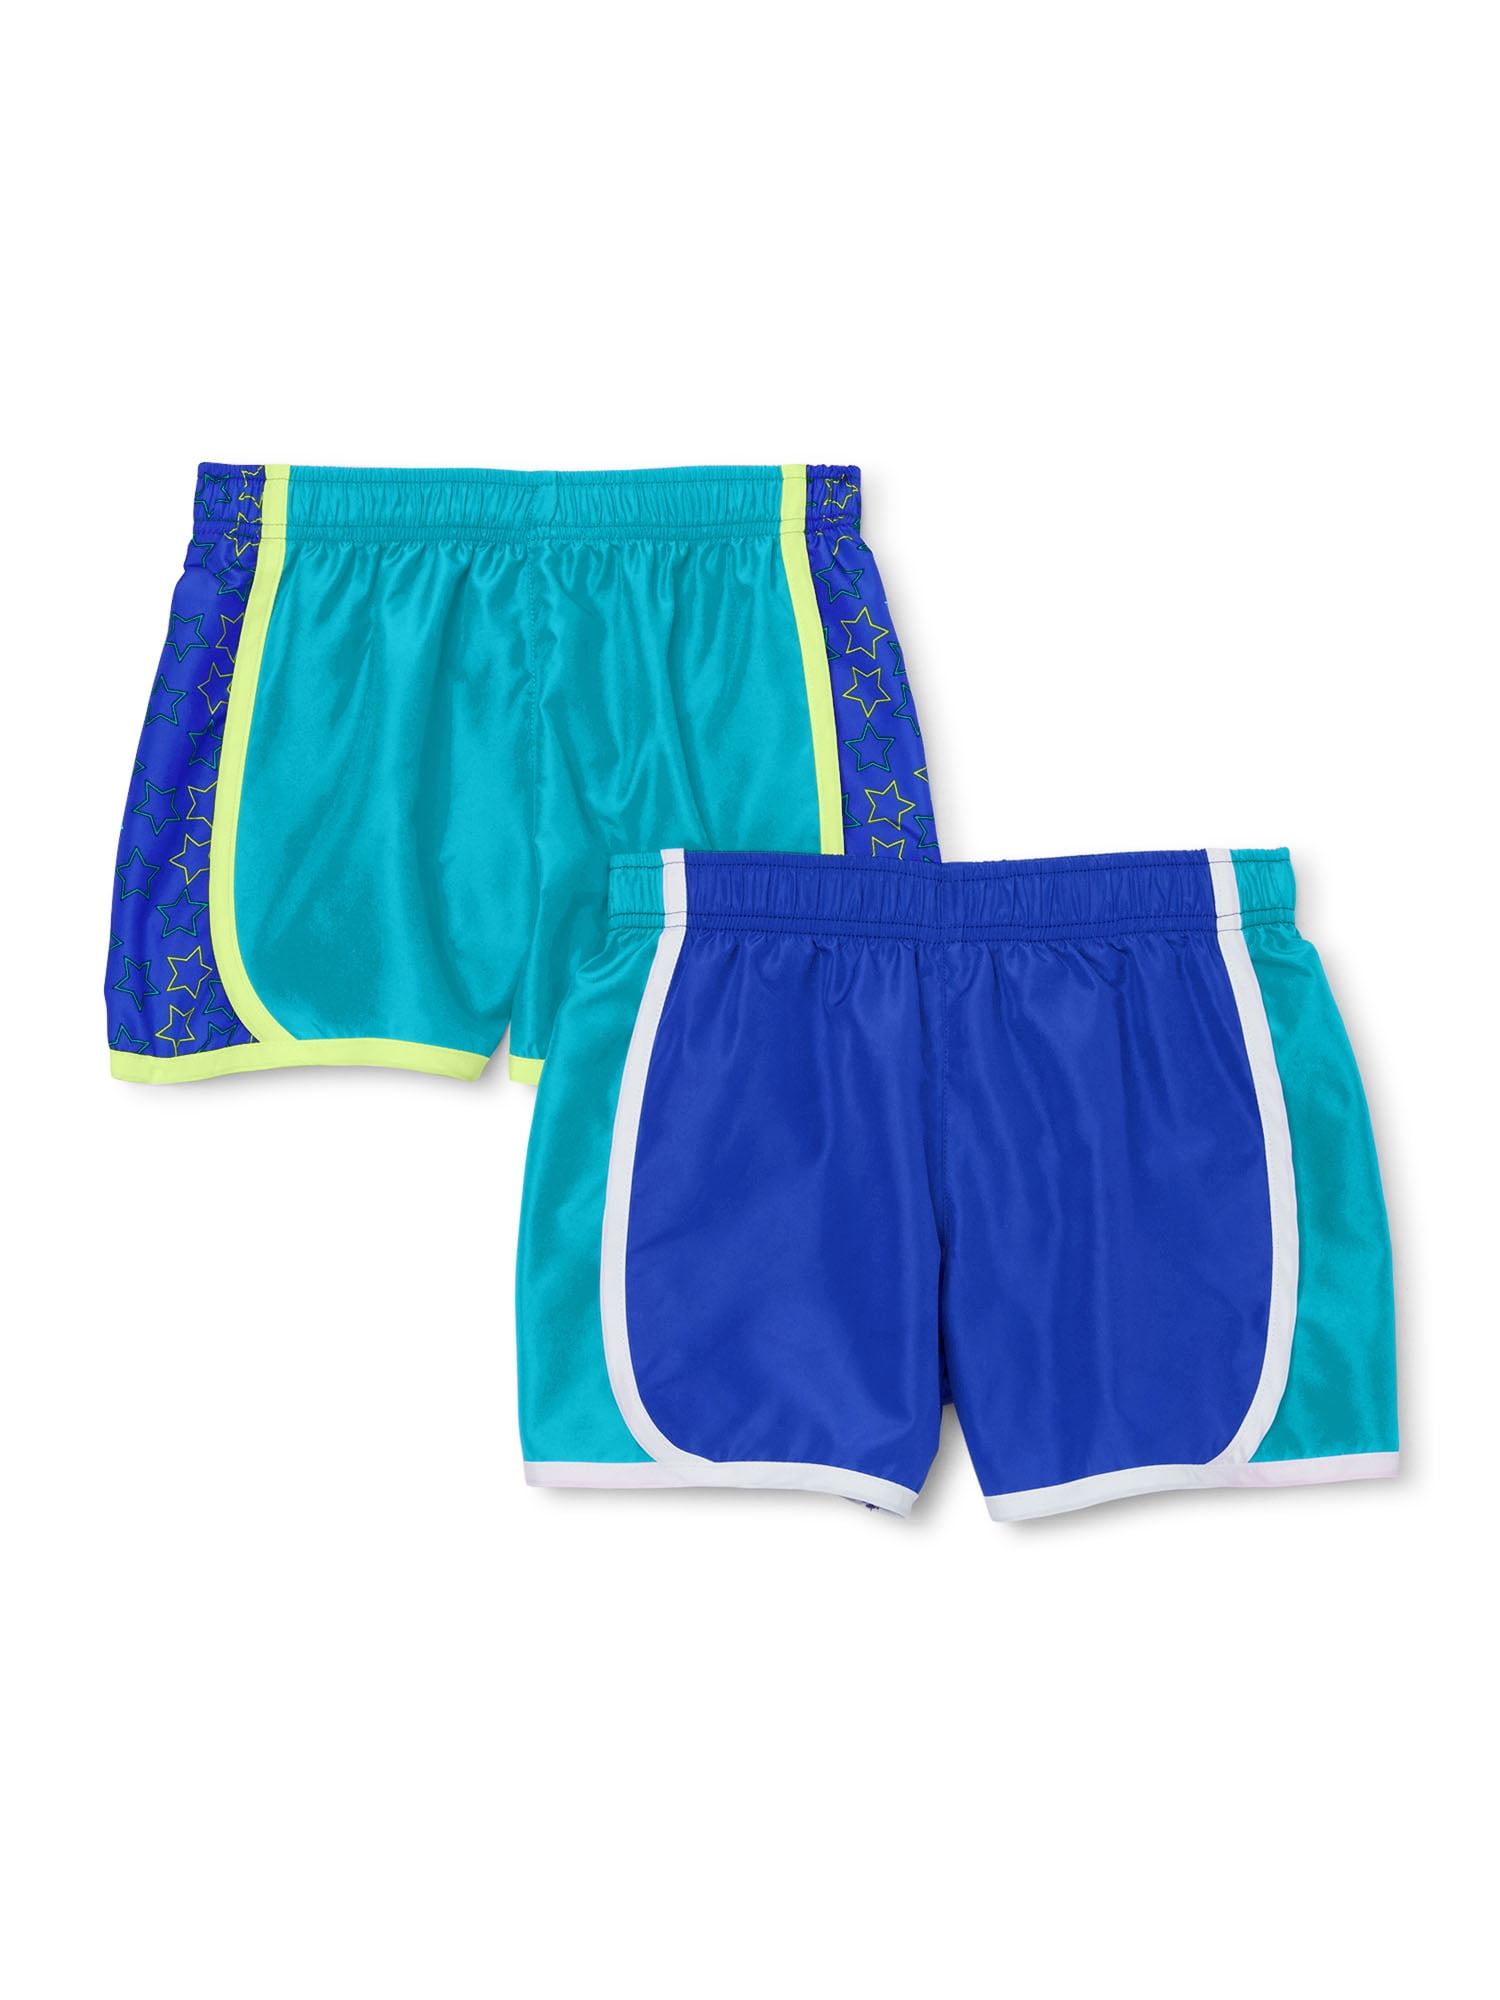 Limted Too Girls Active Shorts 3 Pack Light Fleece Athletic Dolphin Gym Shorts  Big Girl